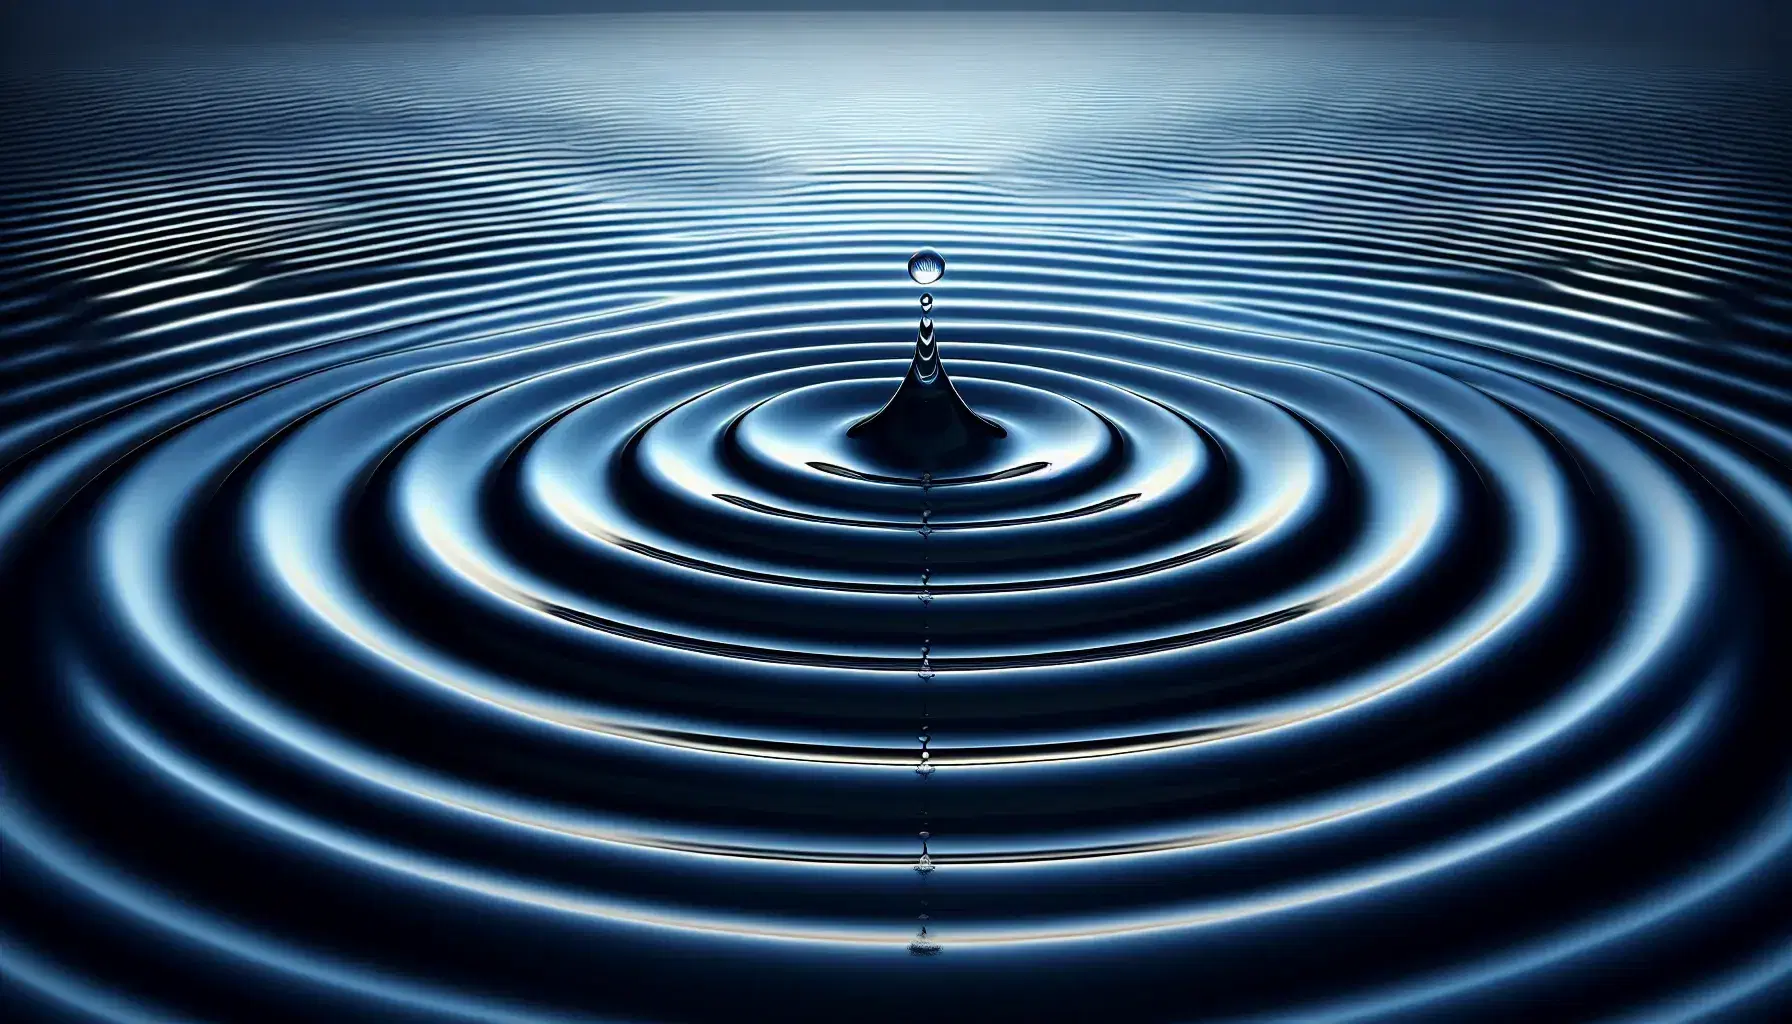 Concentric water ripples radiate from a central point on a calm dark blue surface, highlighted by light, with a gradient background suggesting depth.